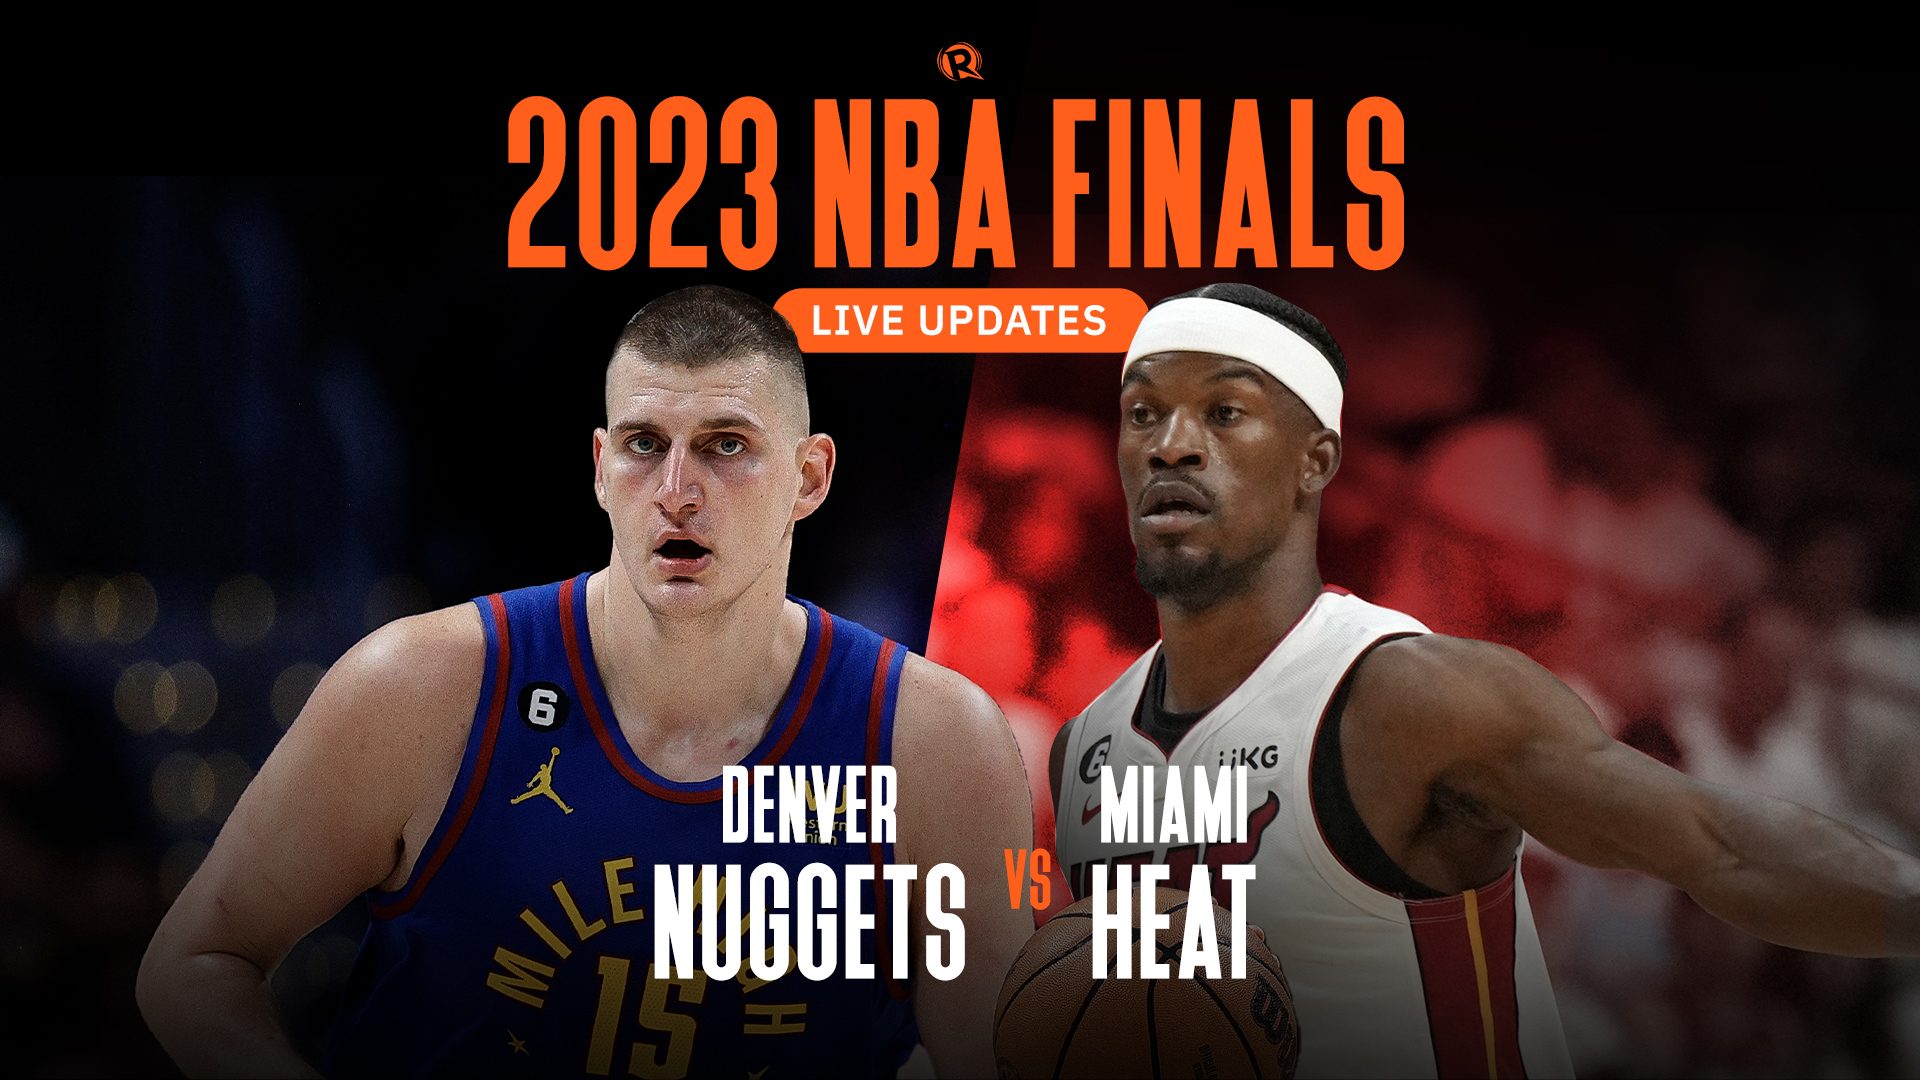 Live stream of the match between Denver Nuggets and Miami Heat in the NBA Finals